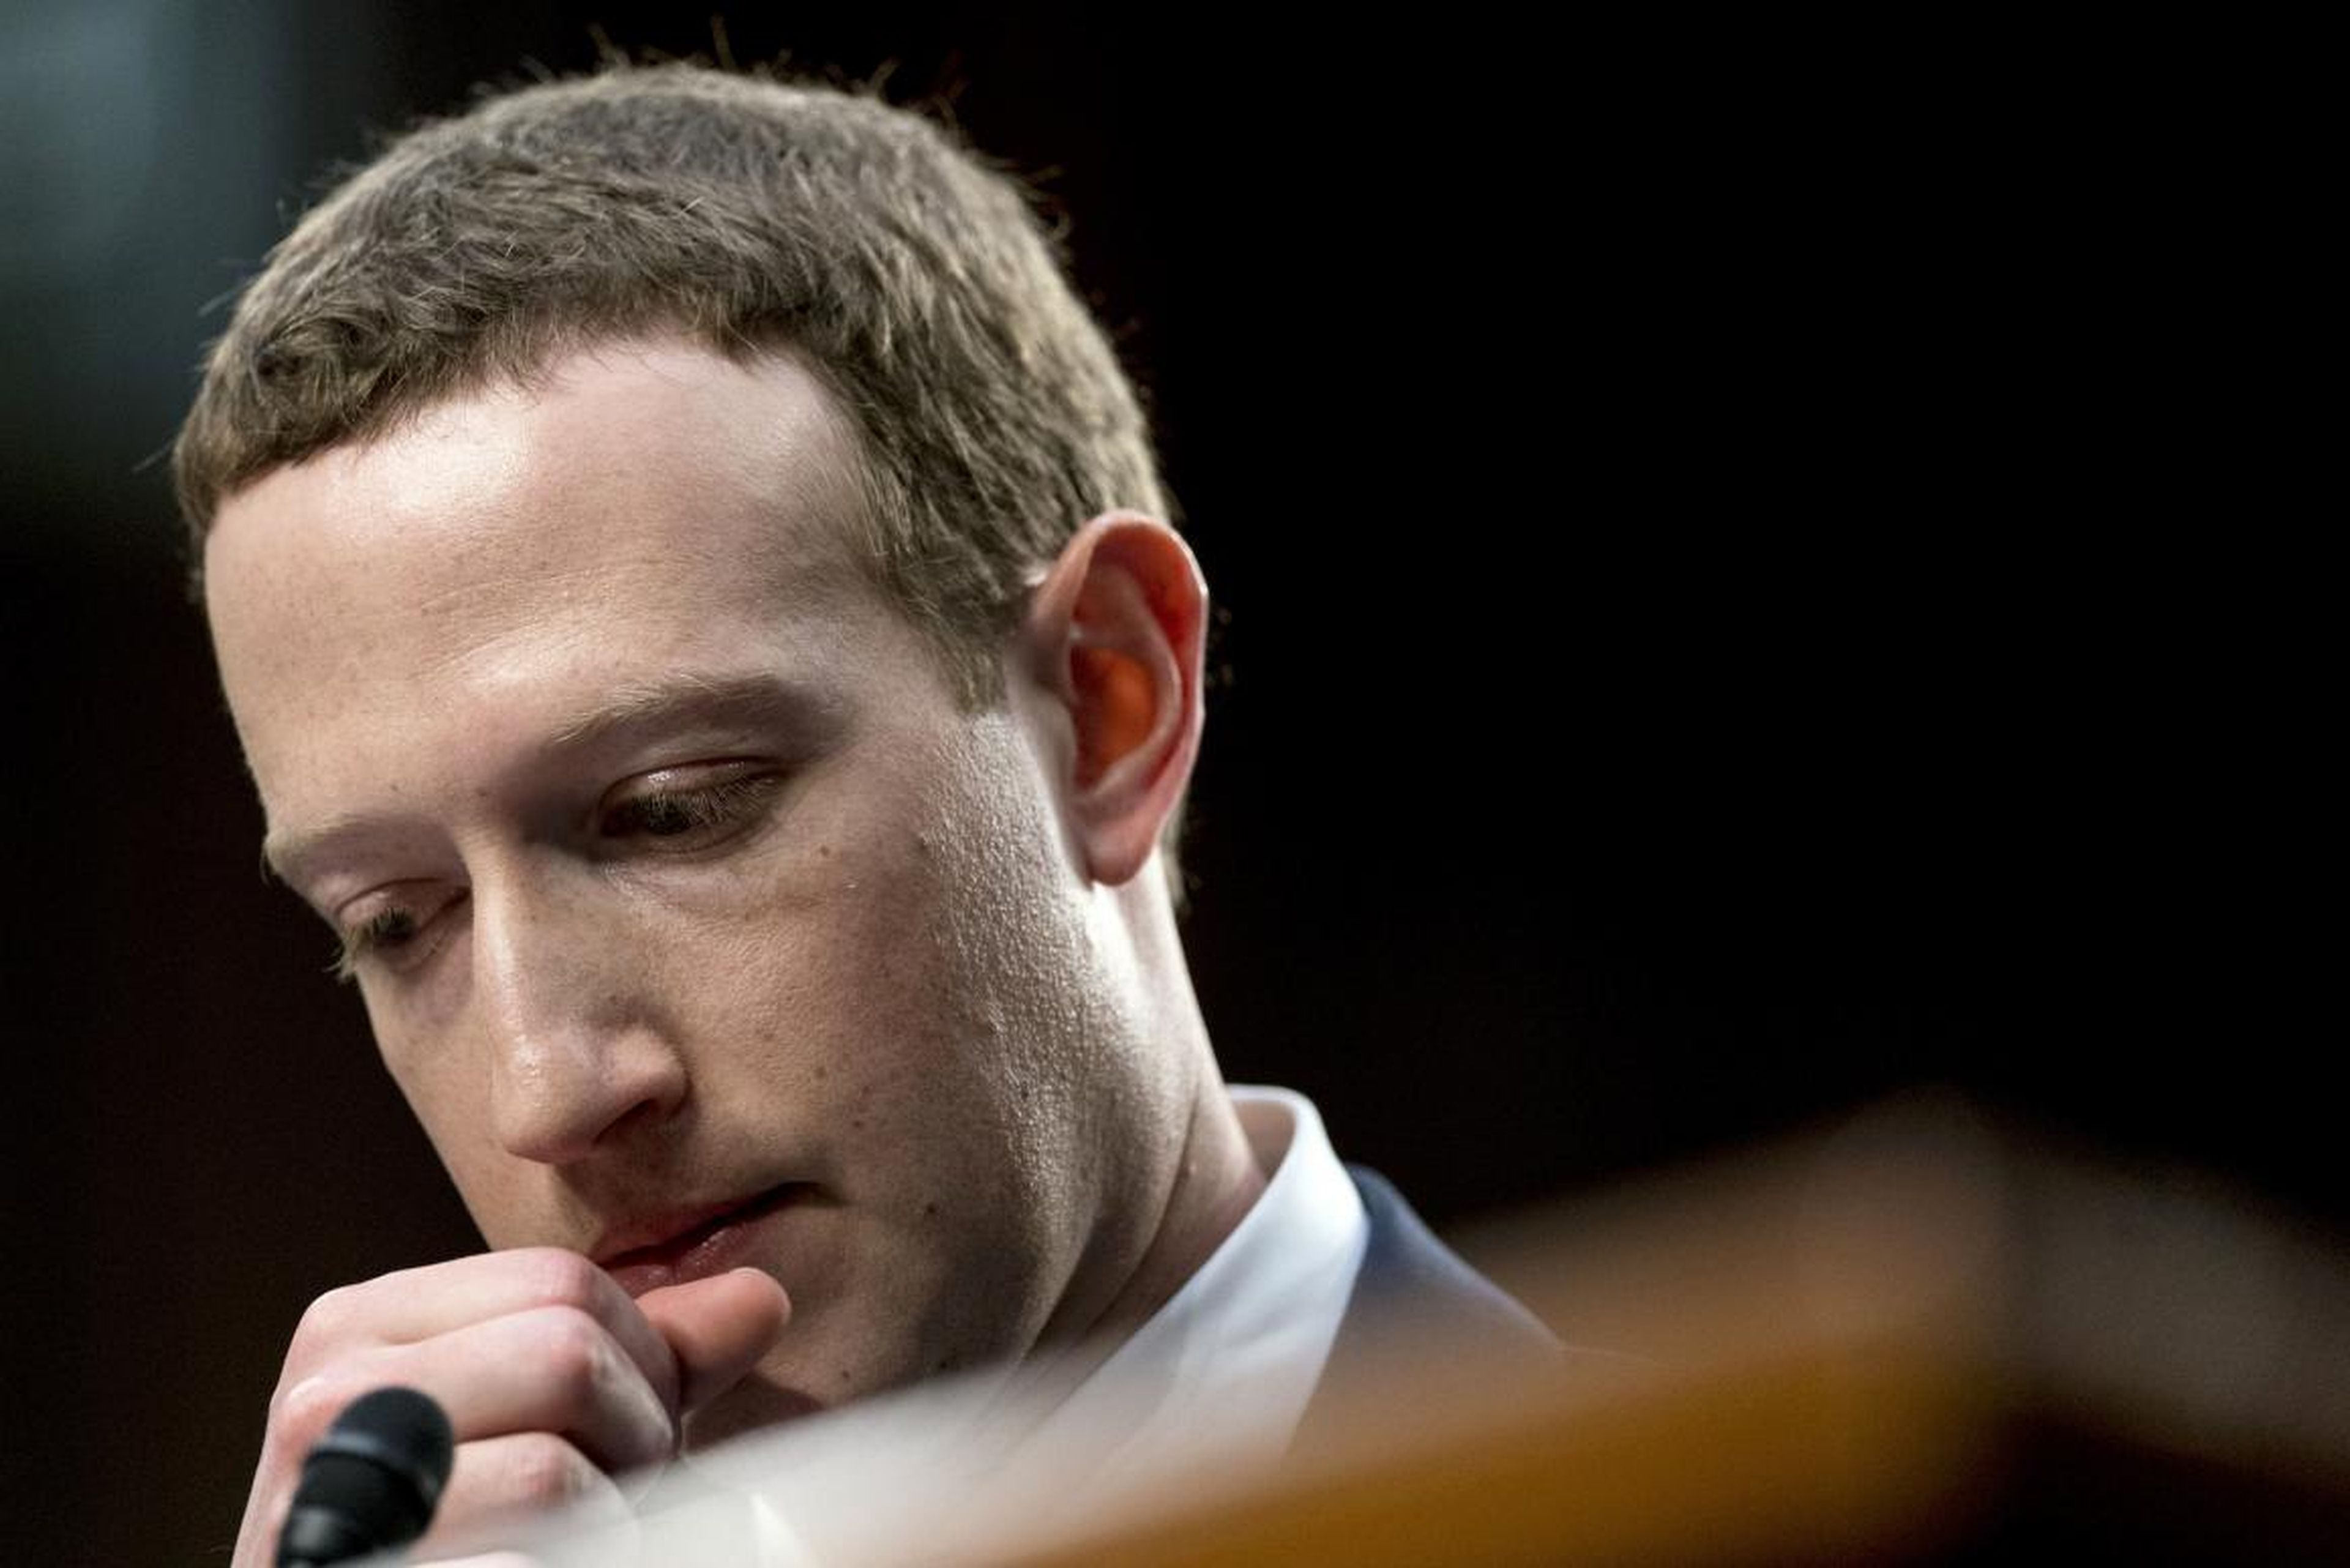 Mark Zuckerberg, CEO of Facebook, which revealed Friday that a hacking attack compromised the personal data of millions of its users.